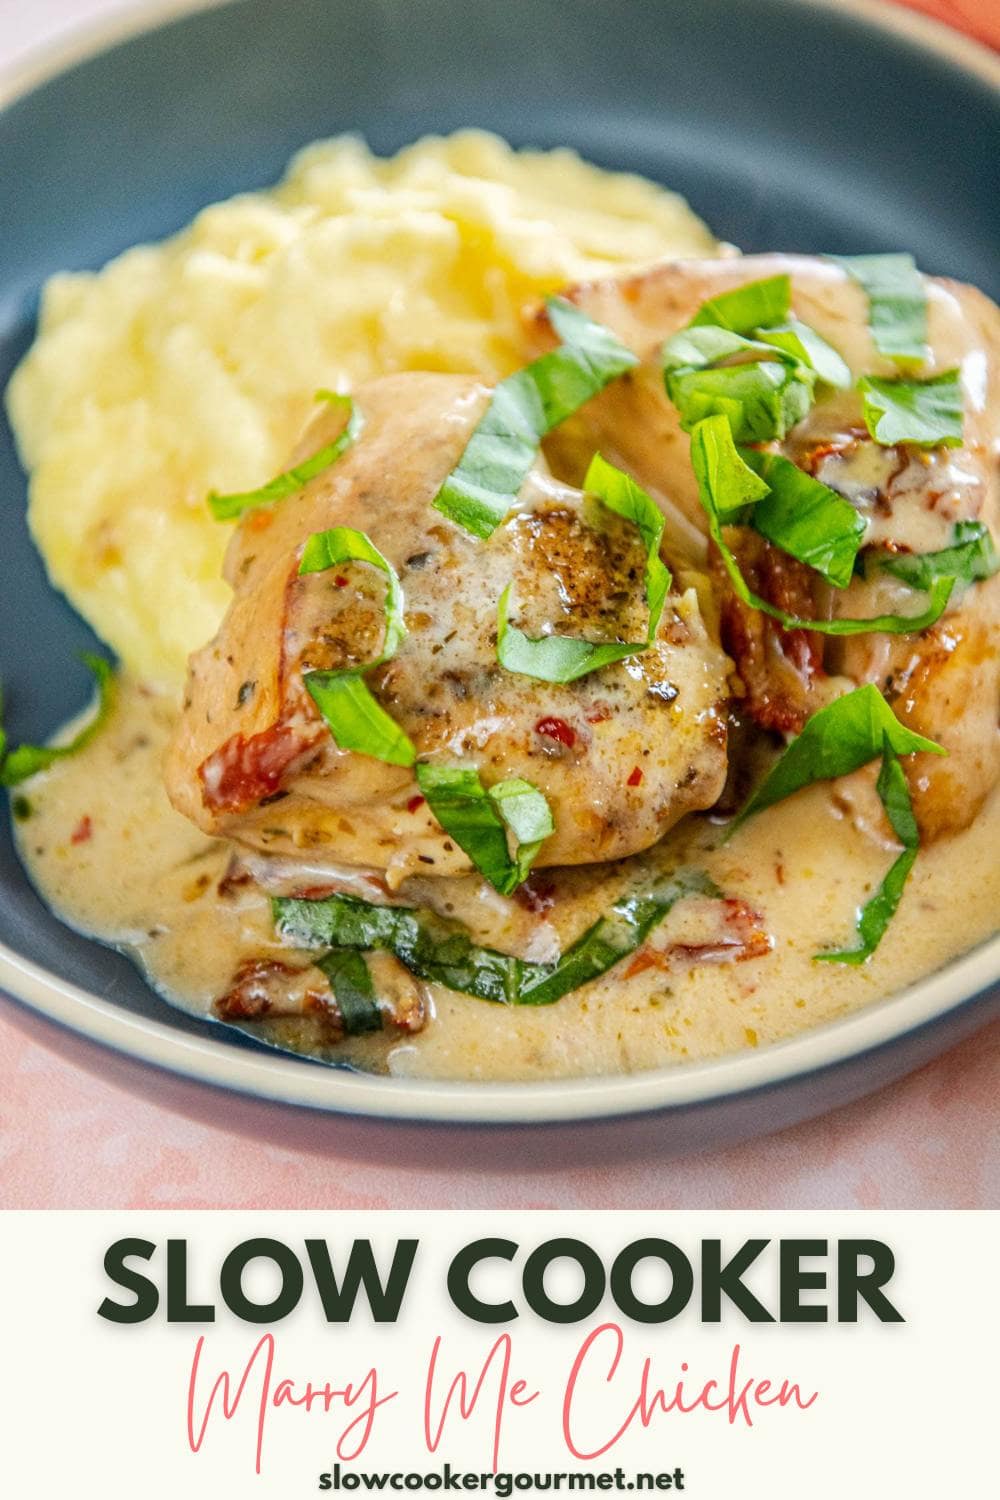 Slow-Cooker Recipes - Recipes by Cooking Style